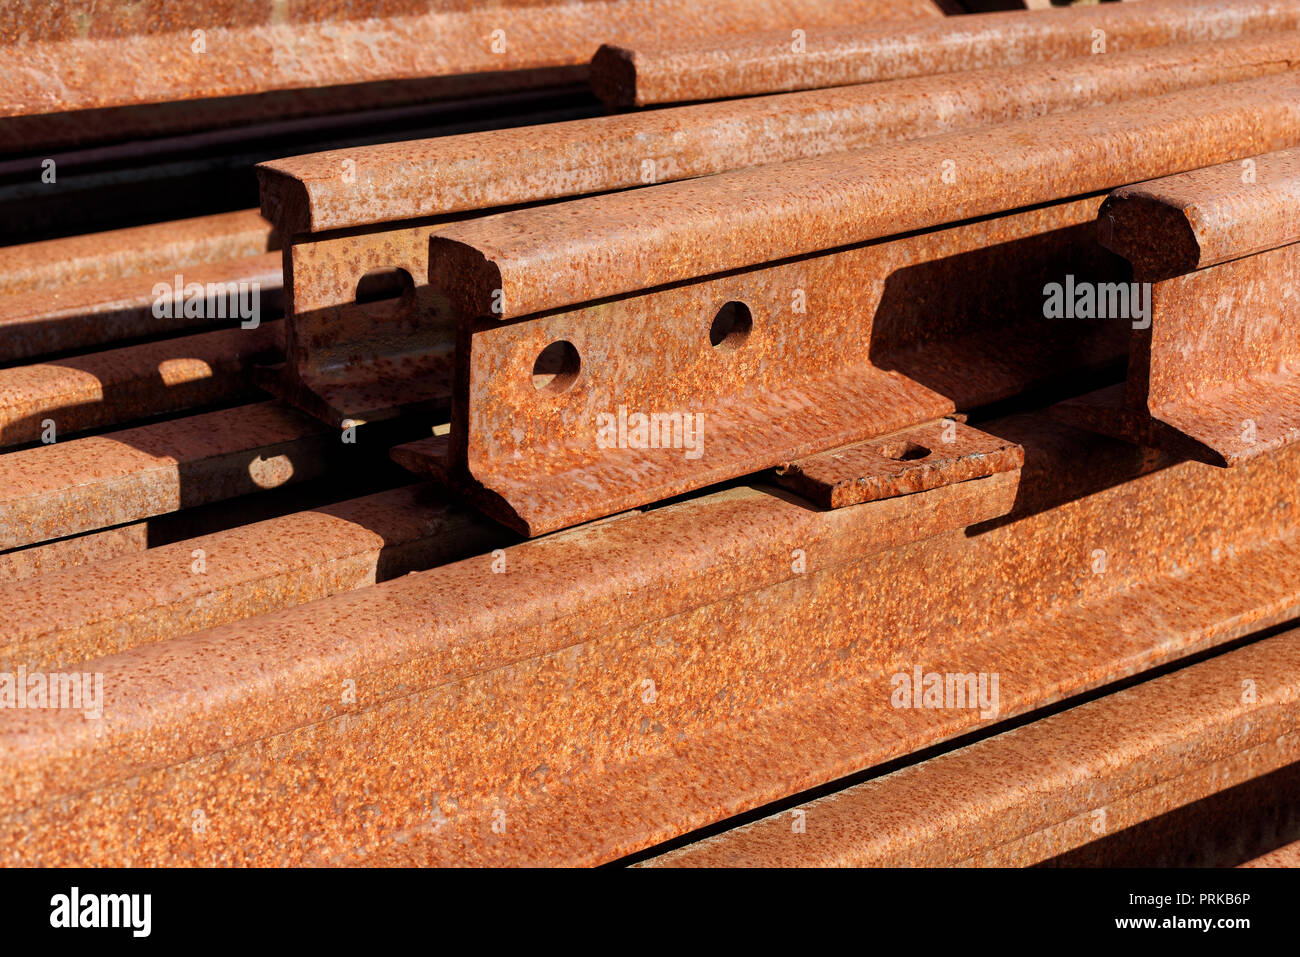 Backgrounds and textures: group of rusty steel rails, stacked in a pile outdoors, industrial abstract Stock Photo